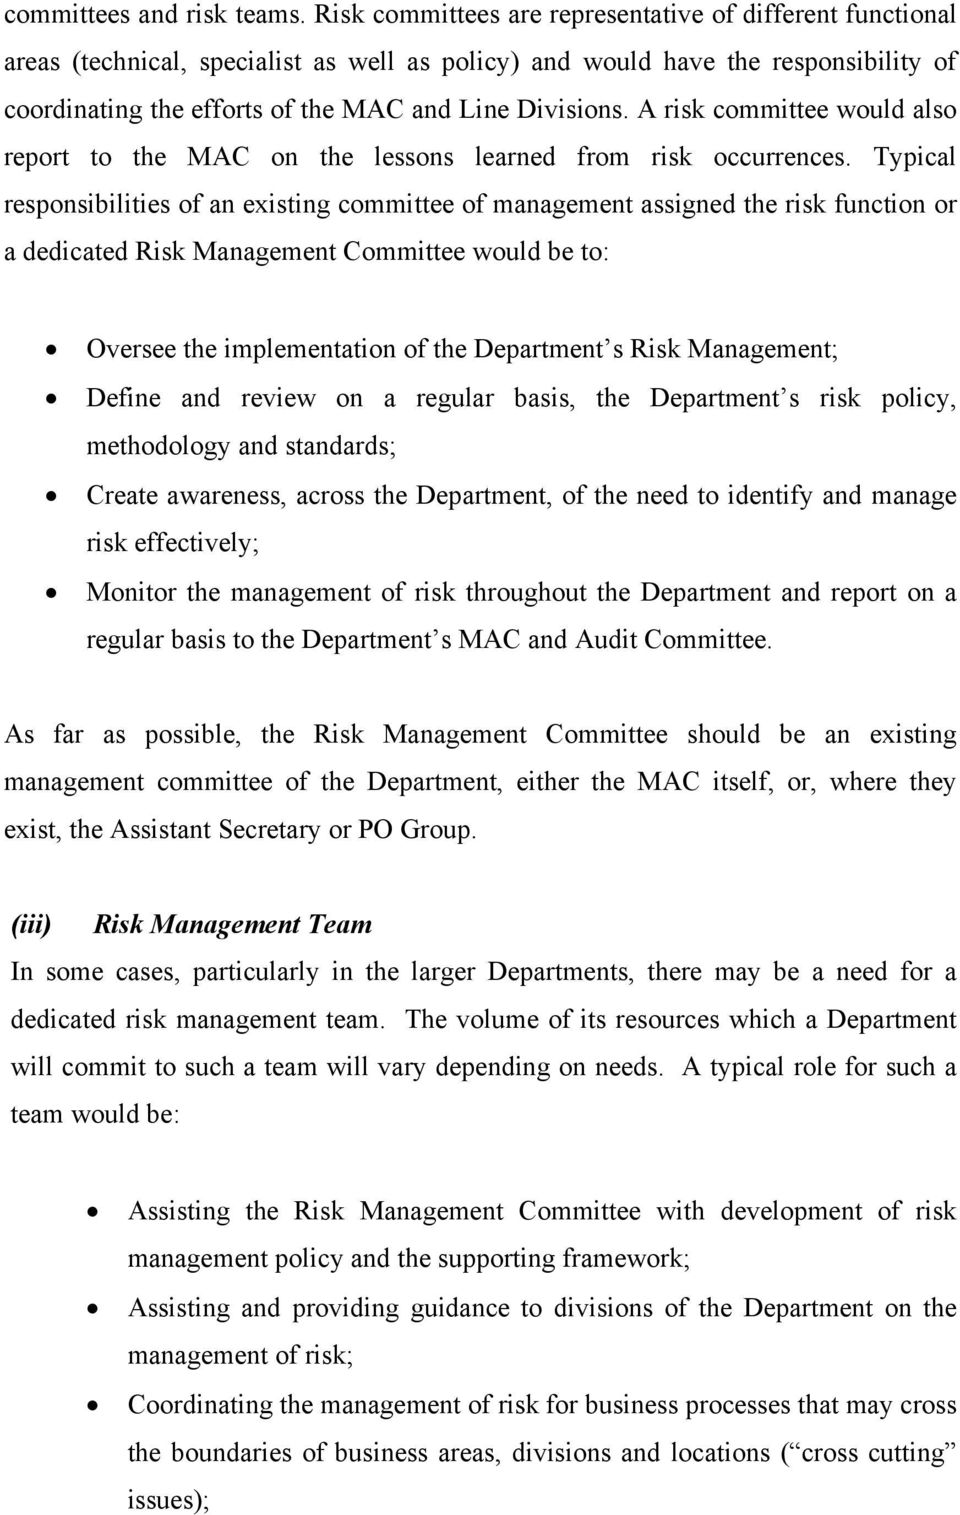 A risk committee would also report to the MAC on the lessons learned from risk occurrences.